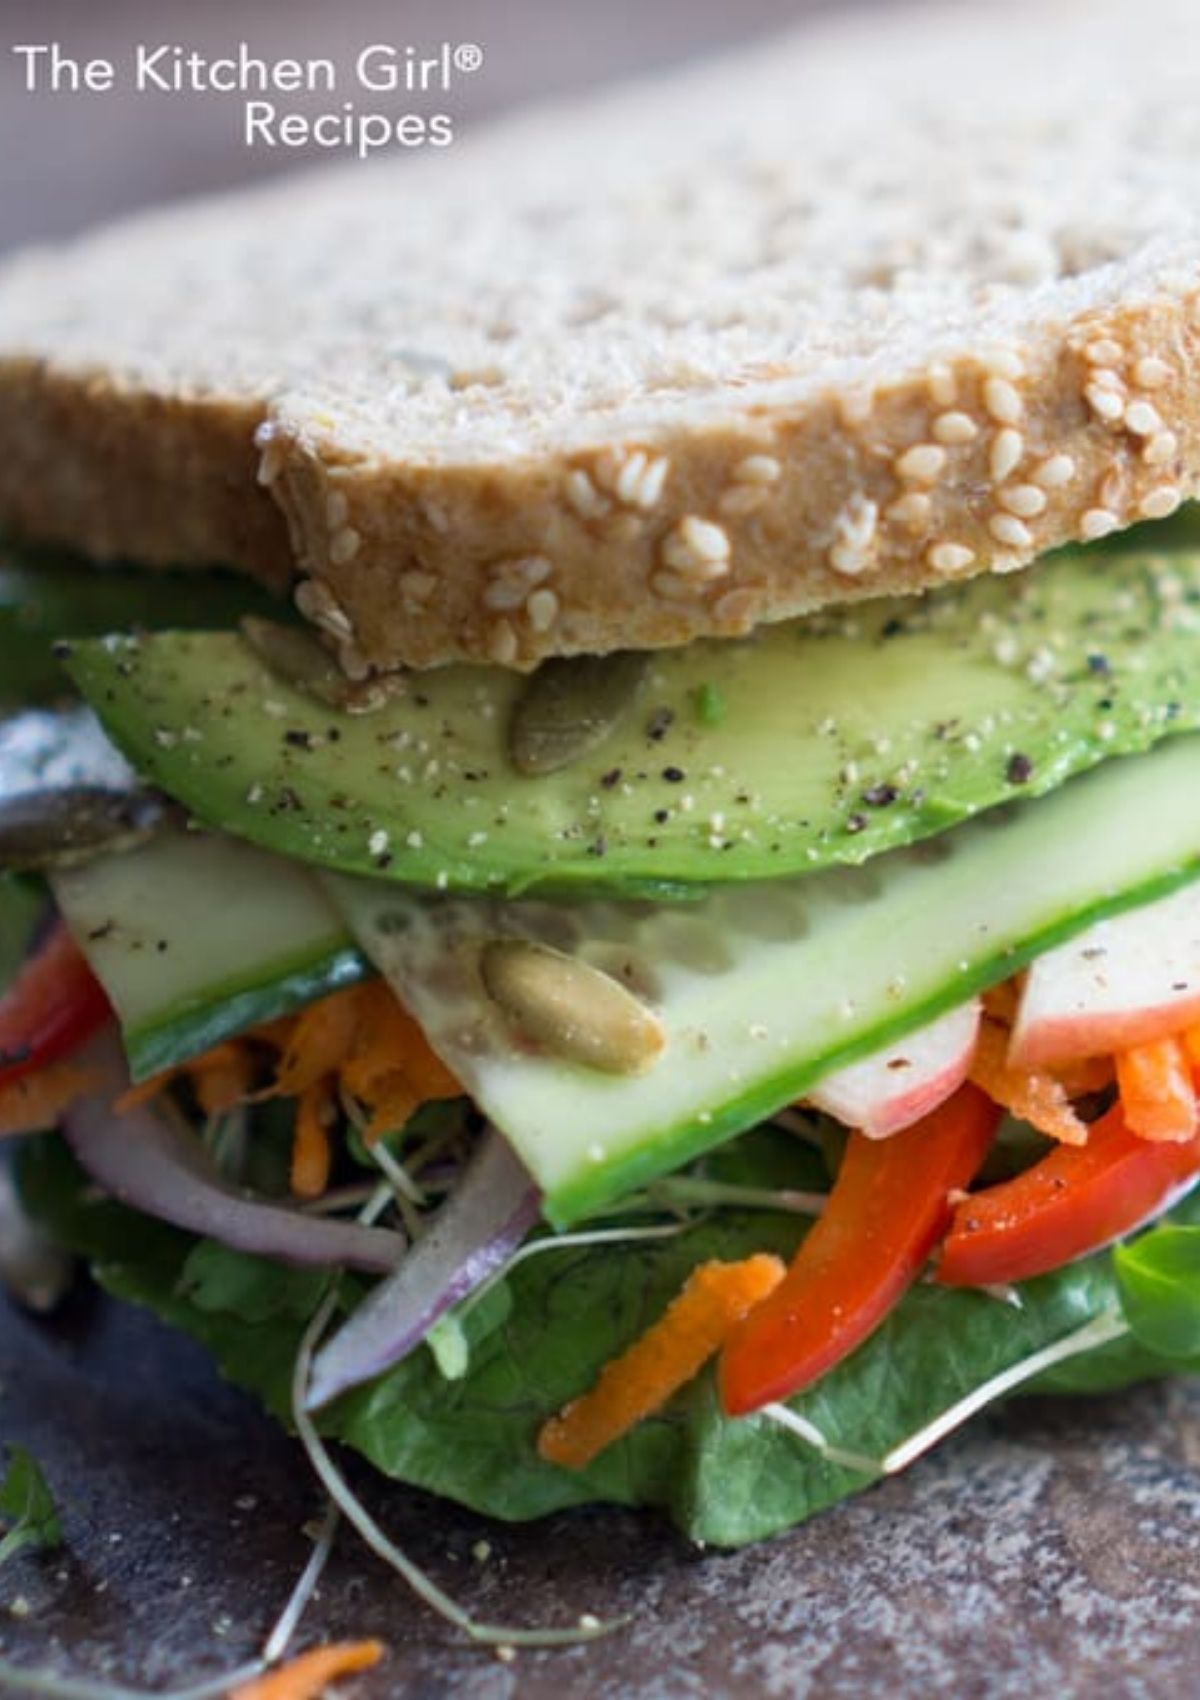 layers of vegetables like avocado, cucumber carrot, red pepper, sprouts, and greens on whole grain bread